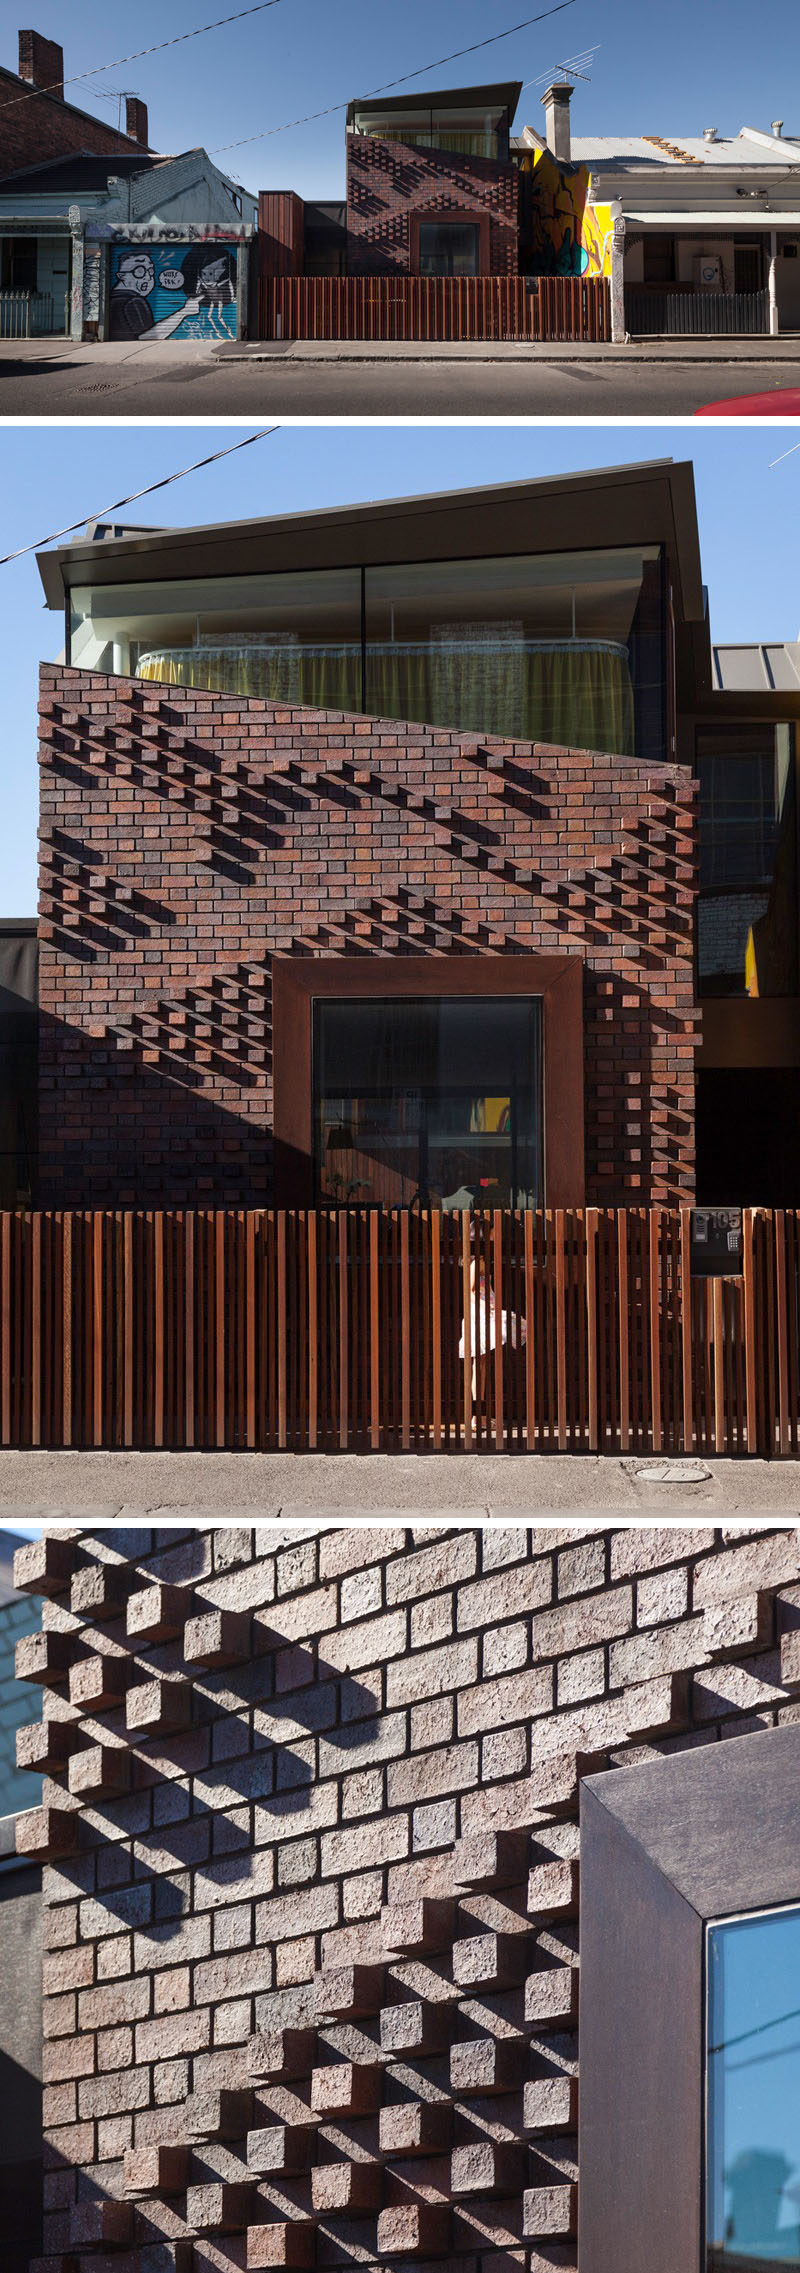 14 Modern Houses Made Of Brick // A unique arrangement of bricks on this house give it a unique texture and pattern that changes throughout the day depending on how the sun casts shadows on the protruding bricks.